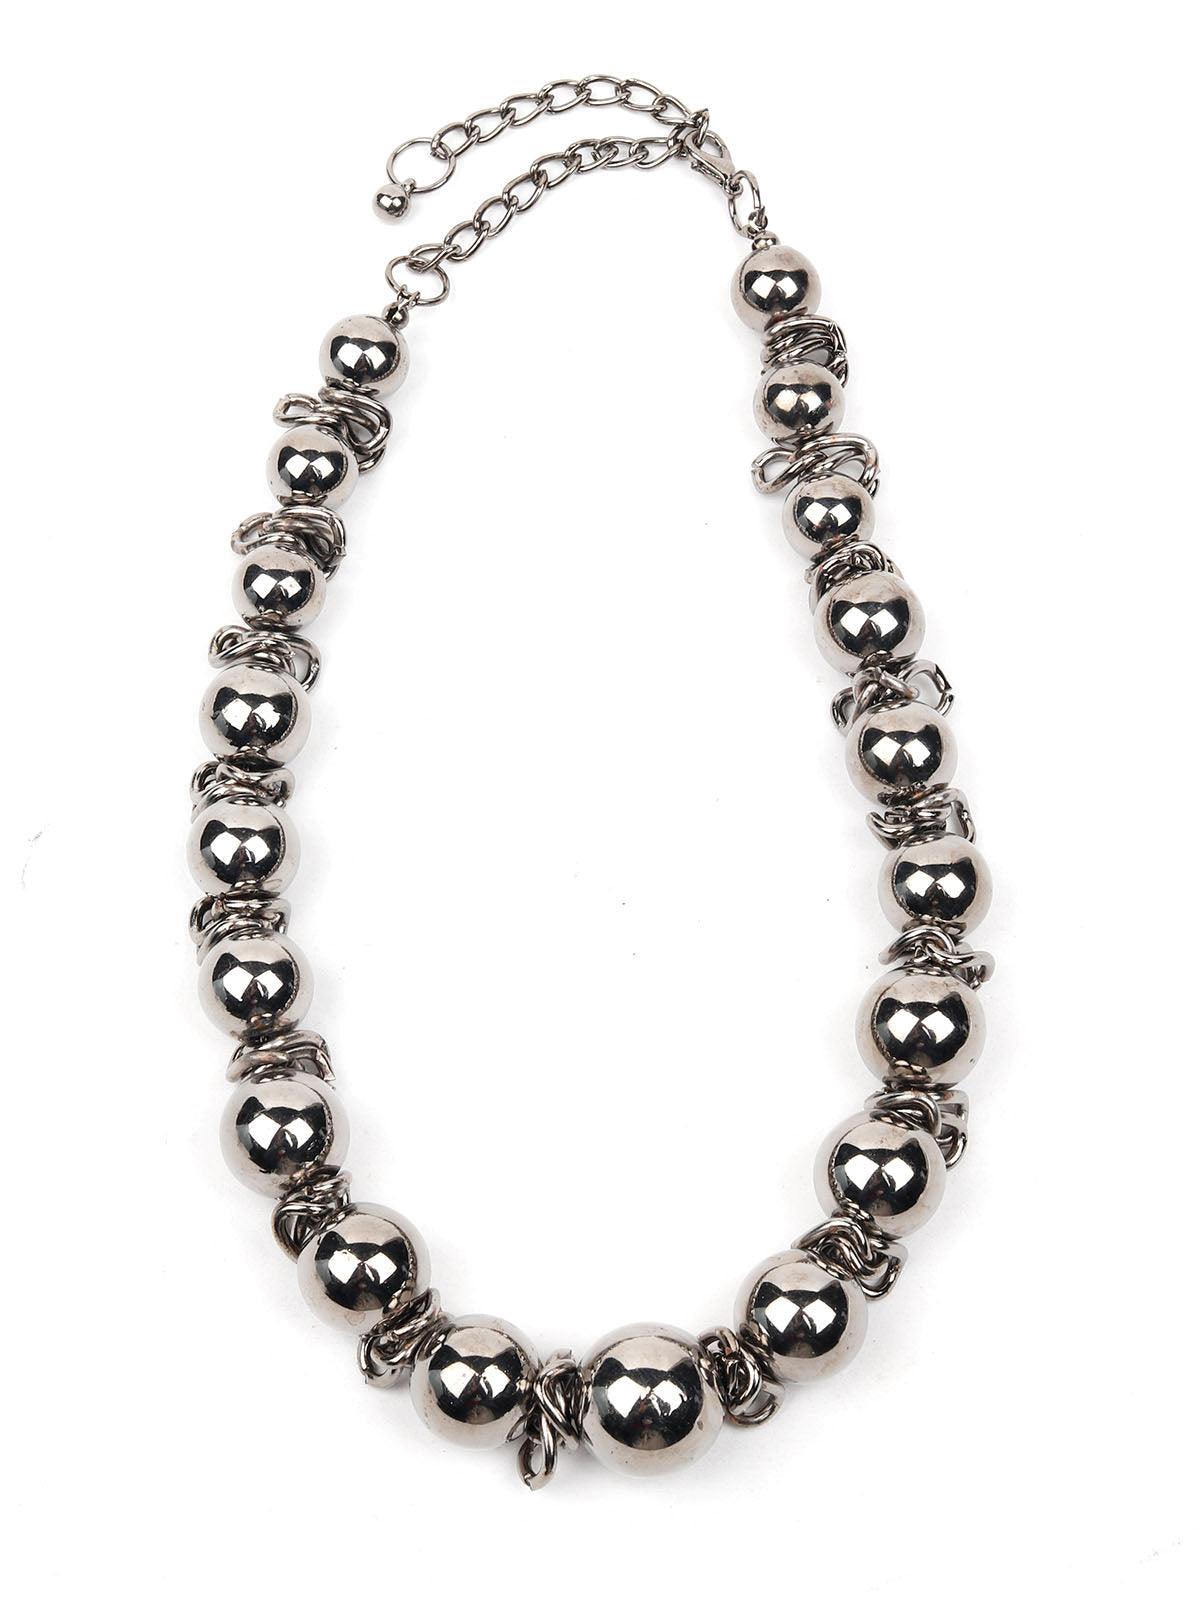 Women's Rounded Silver Statement Necklace - Odette